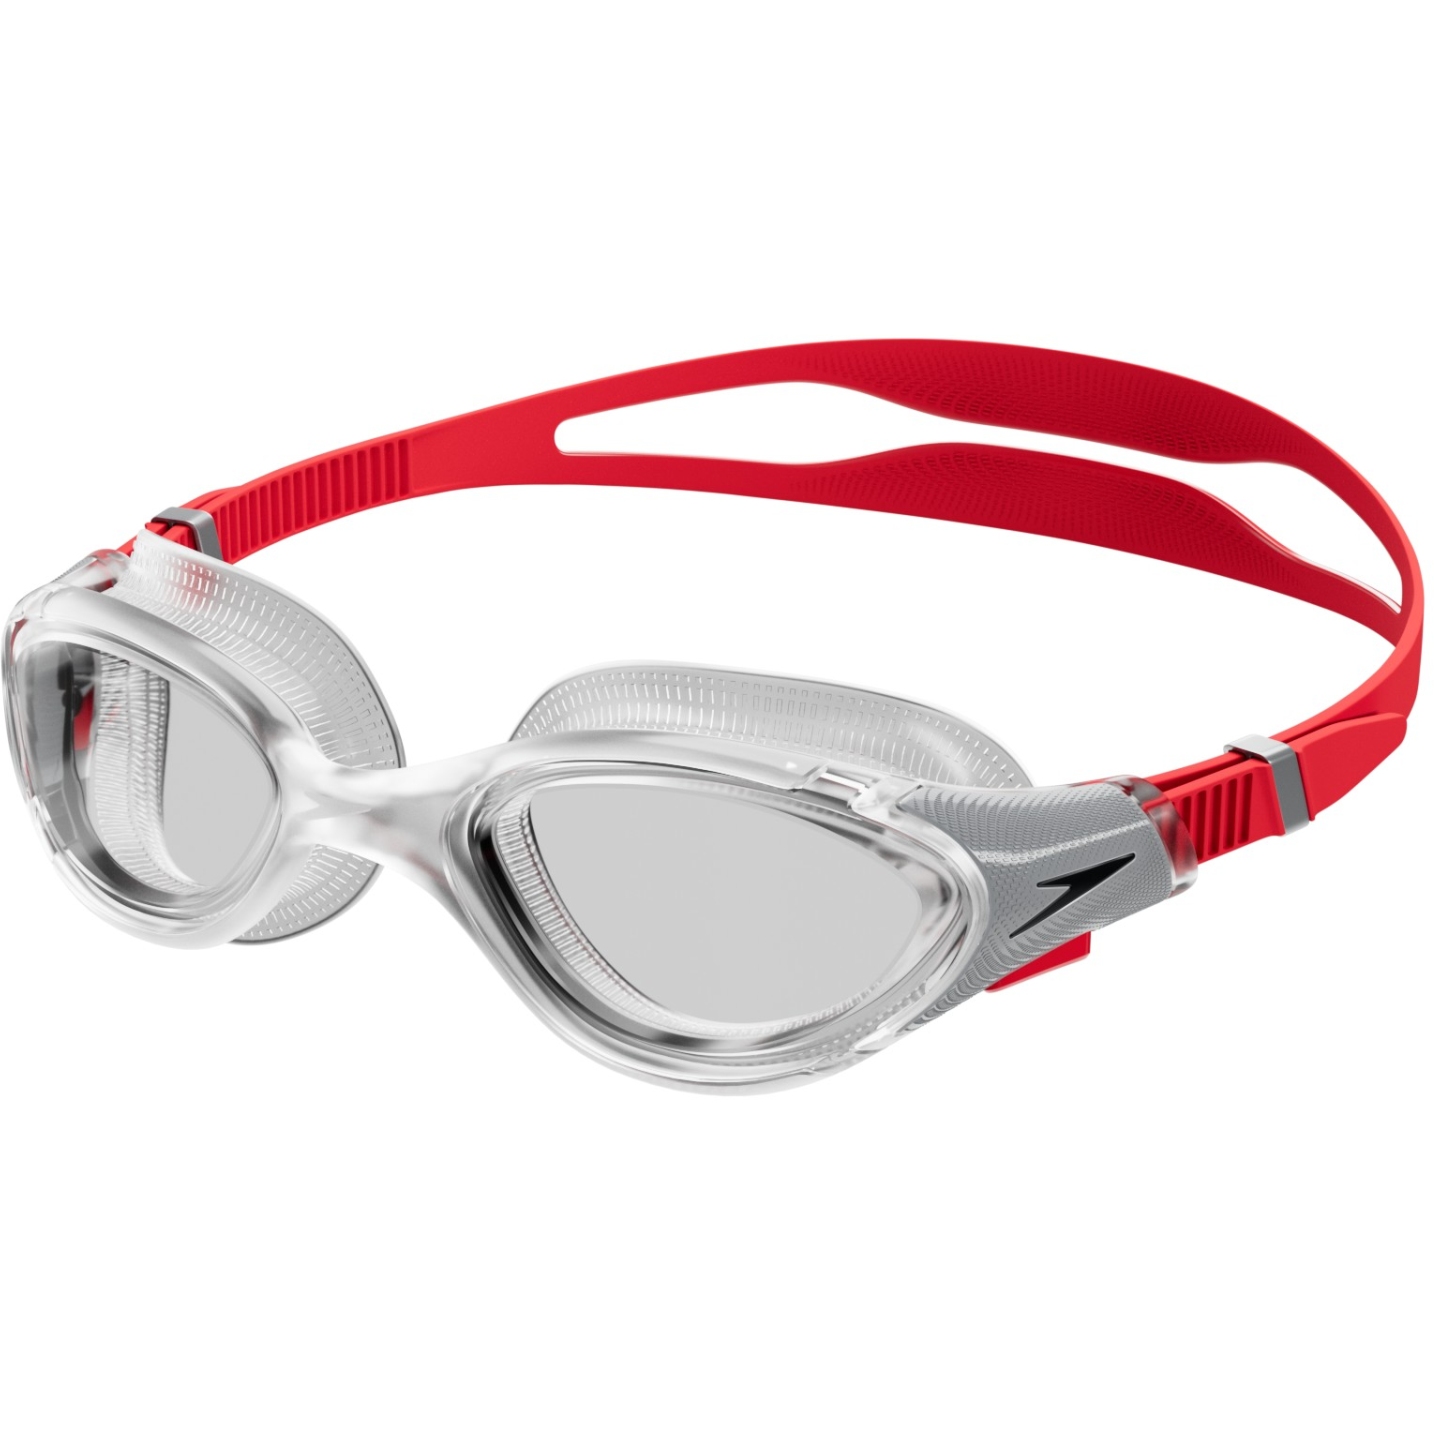 Picture of Speedo Futura Biofuse Flexiseal Swimming Goggles - fed red/silver/clear